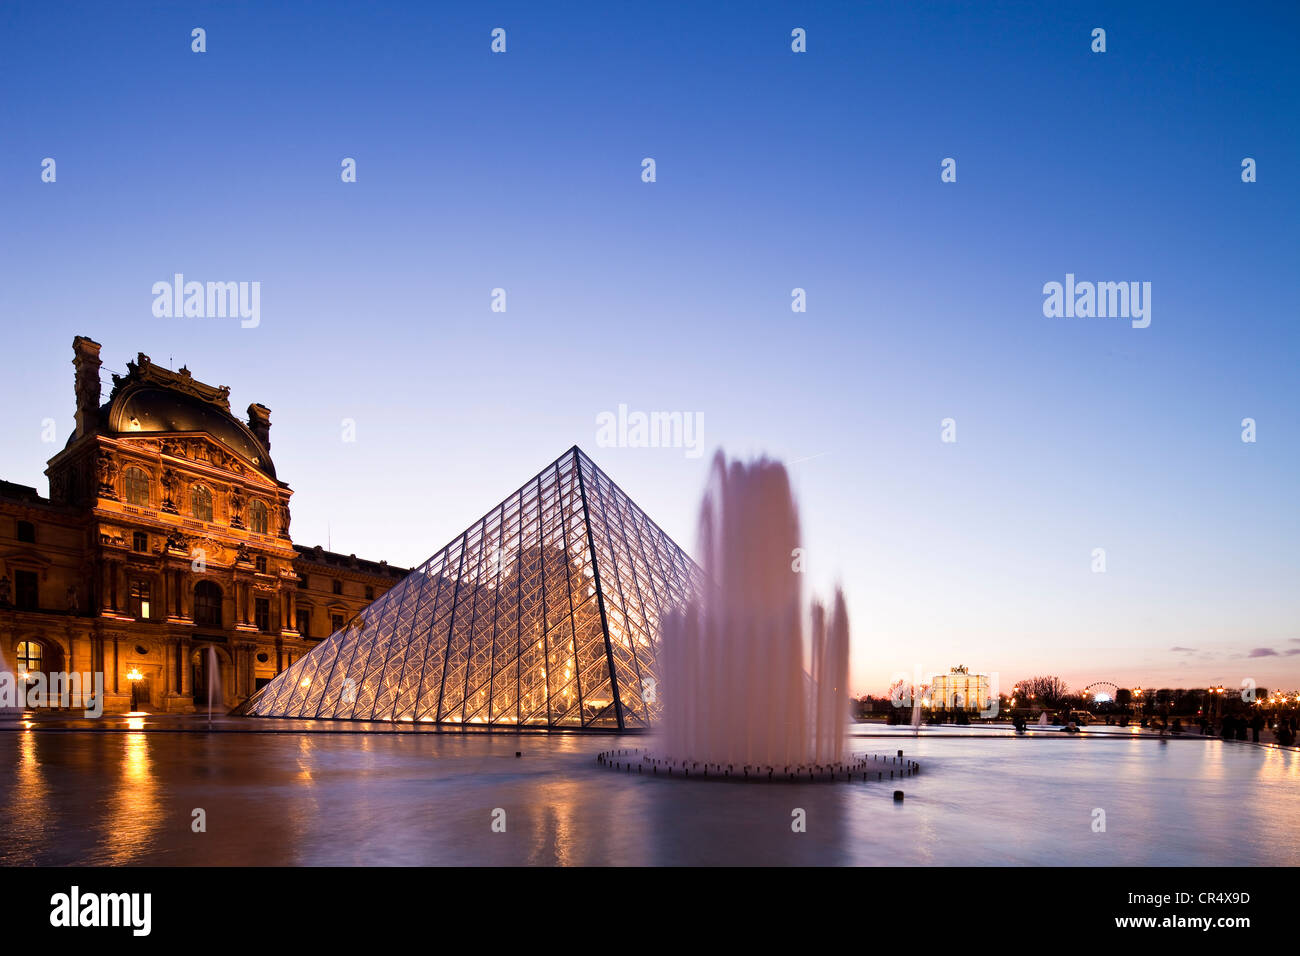 France, Paris, Louvre Museum and Pyramid by the architect Ieoh Ming Pei in the Cour Napoleon, lighting by Claude Engle Stock Photo